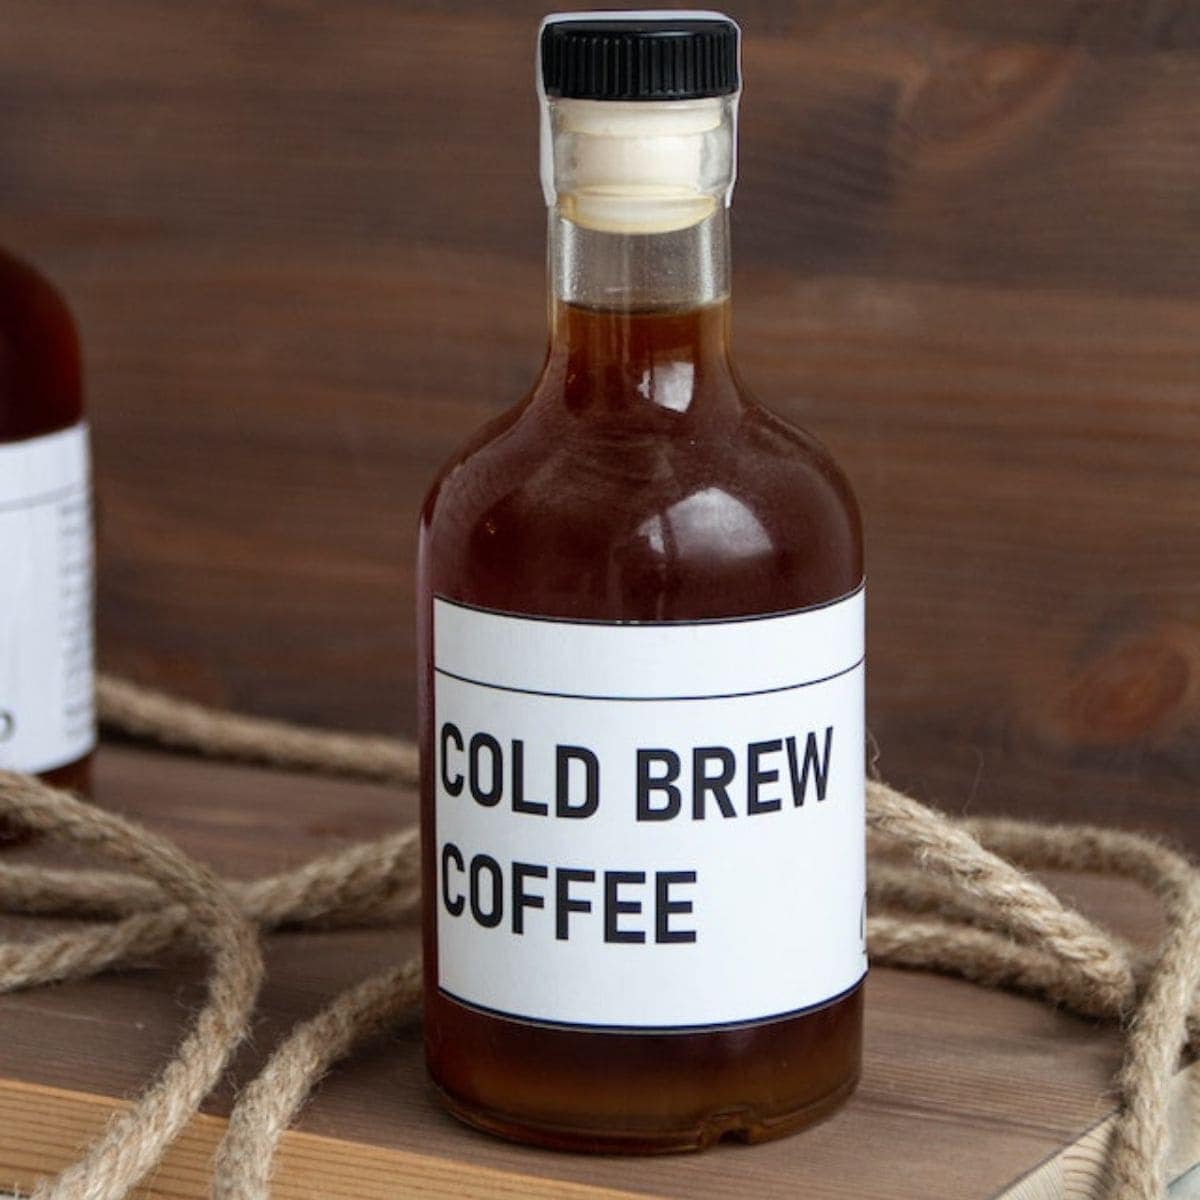 Cold brew coffee in a bottle